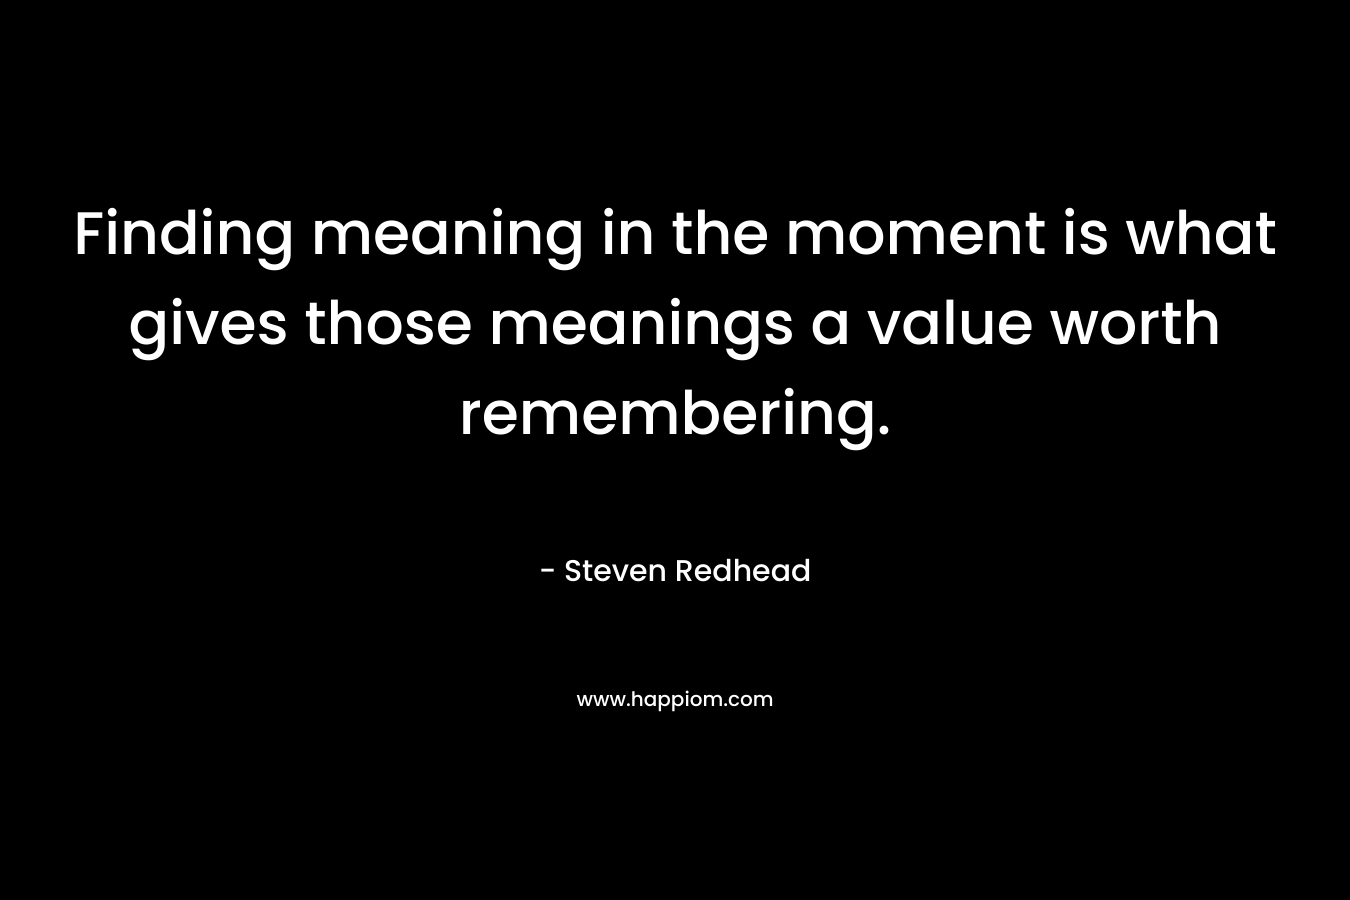 Finding meaning in the moment is what gives those meanings a value worth remembering. – Steven Redhead